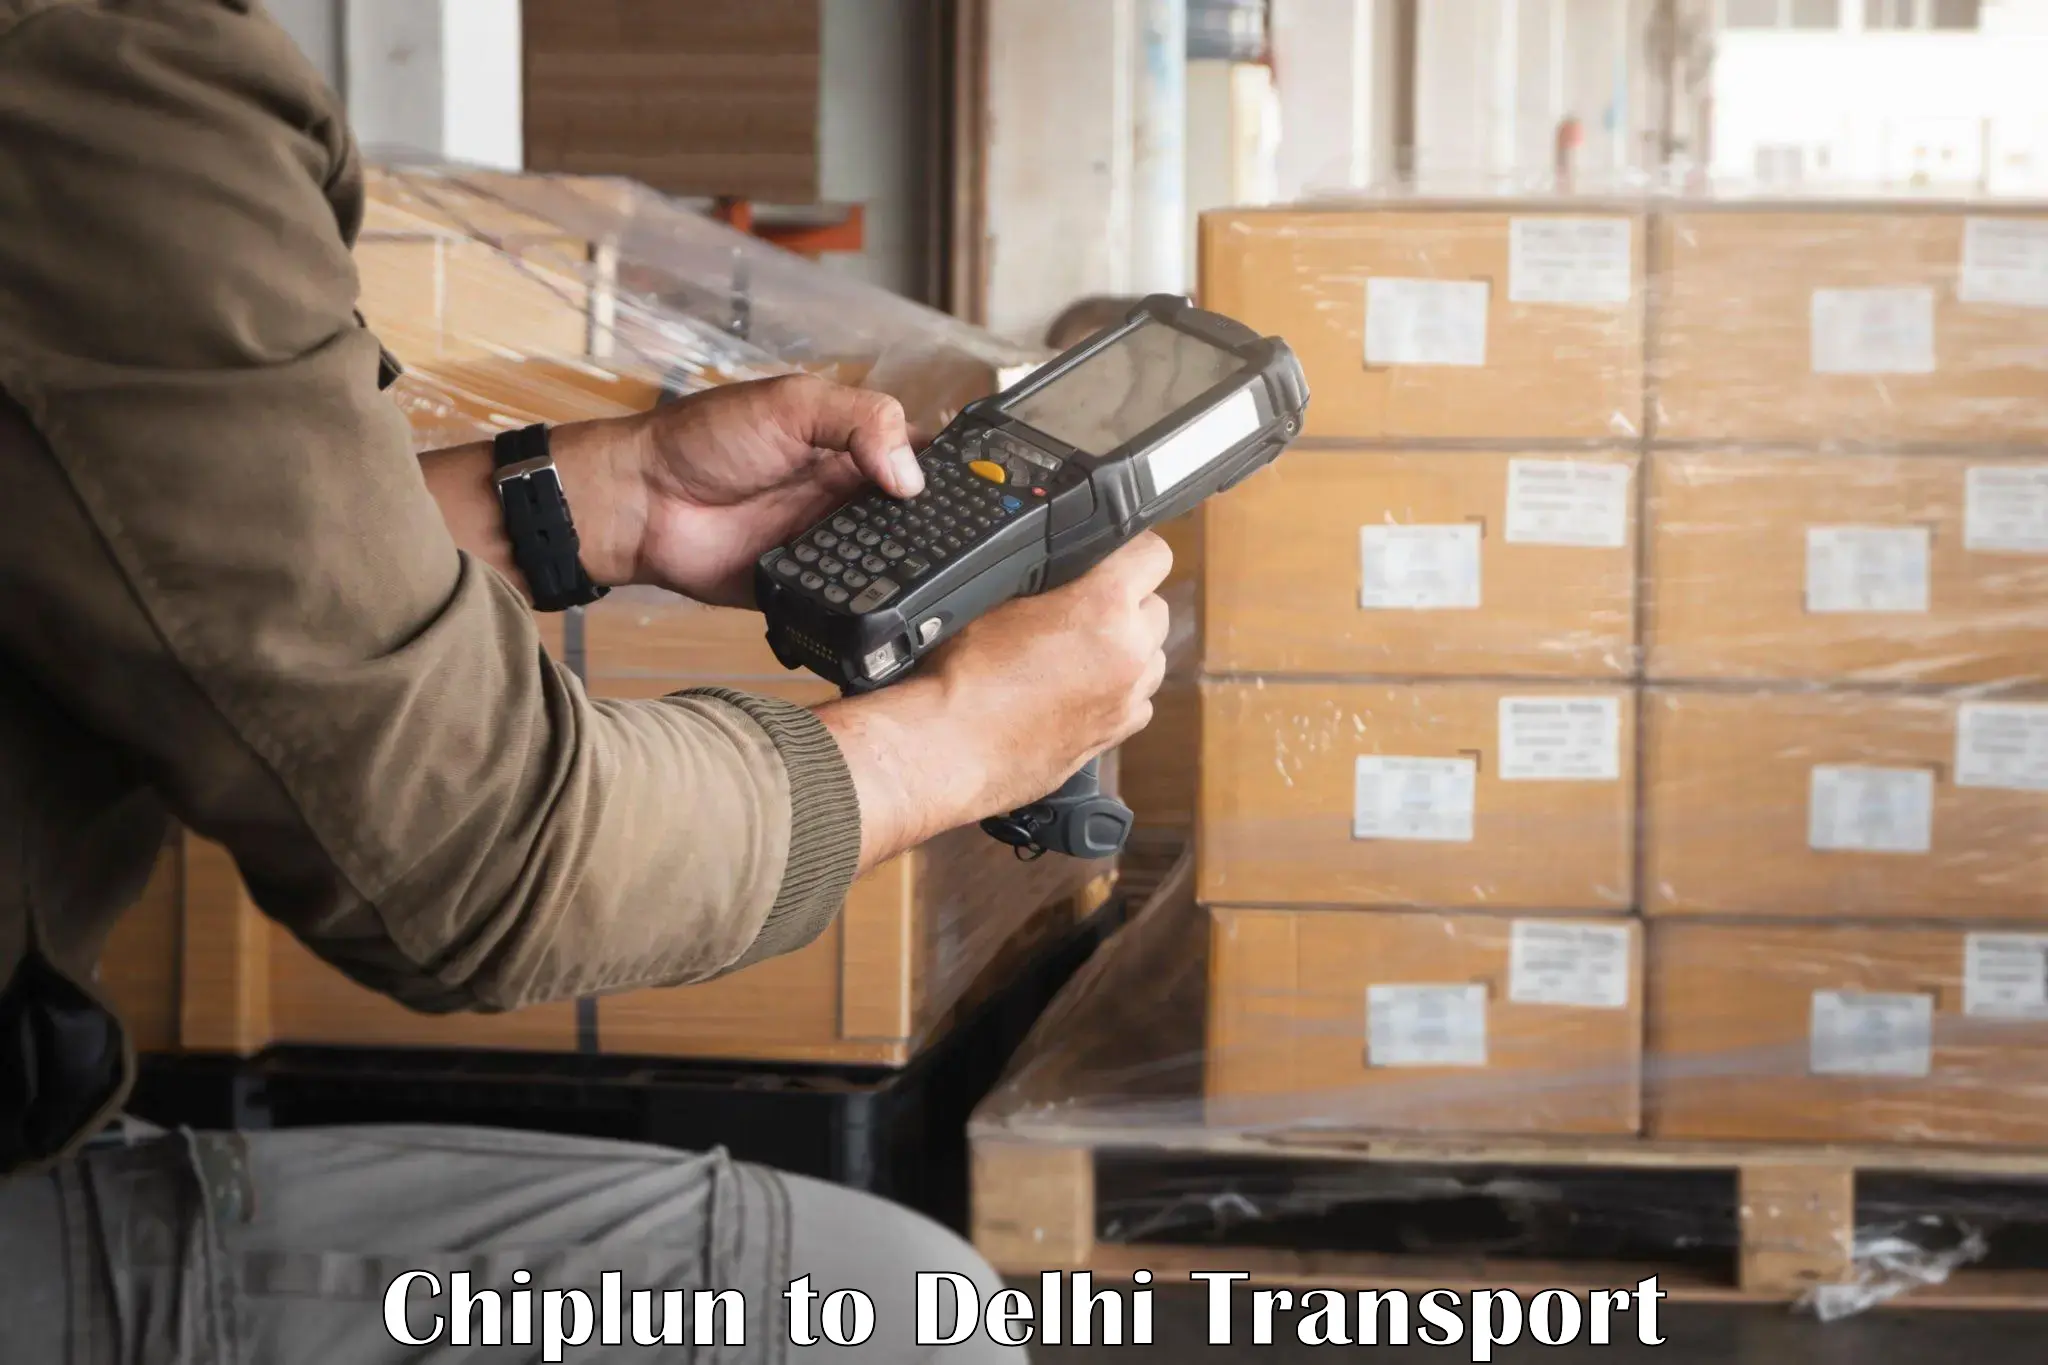 Delivery service Chiplun to East Delhi